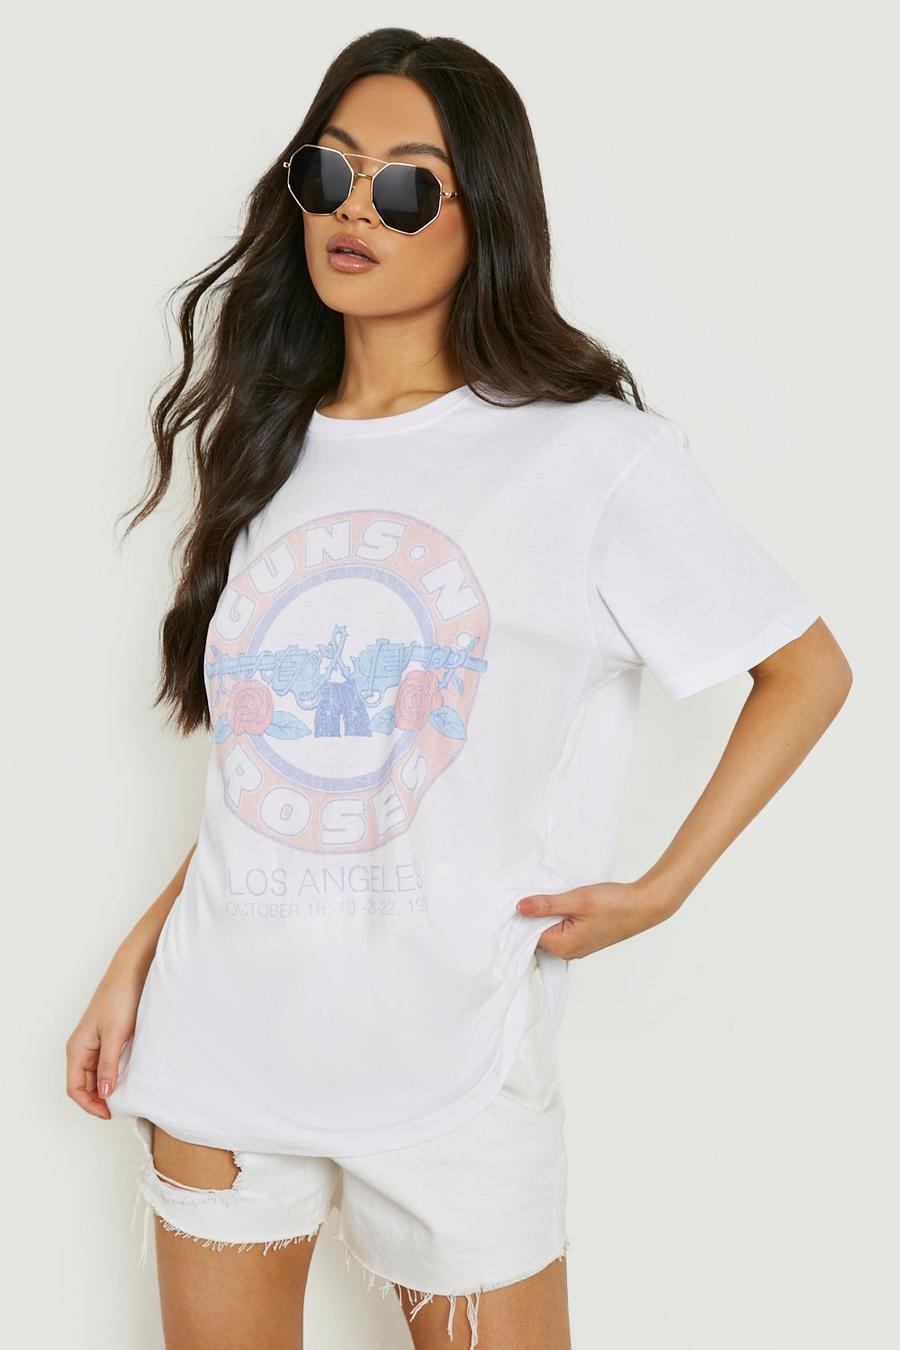 T-shirt oversize ufficiale Guns N Roses, White image number 1